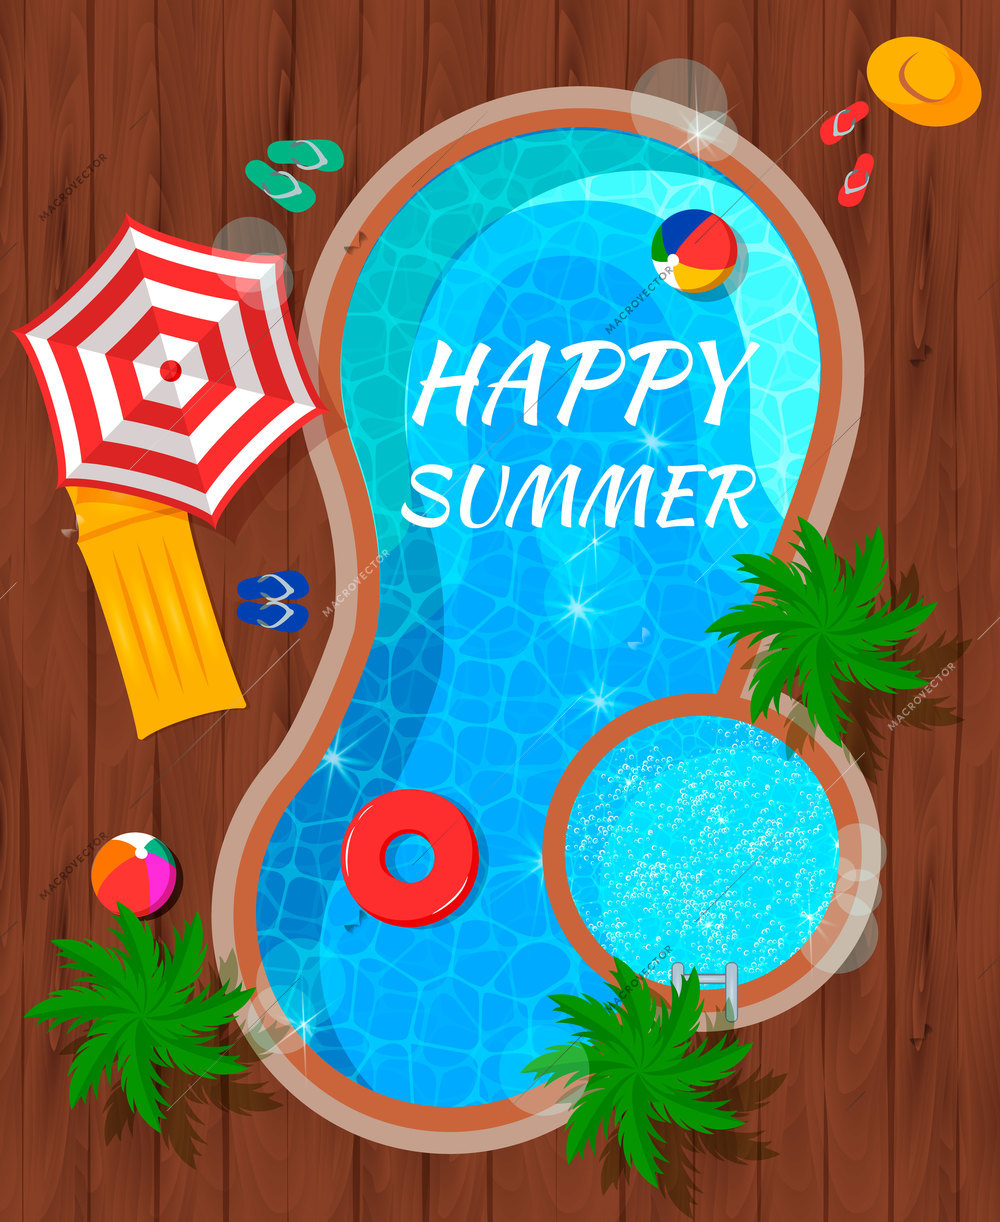 Summer pool with beach accessories and palm trees top view flat composition on wooden background vector illustration